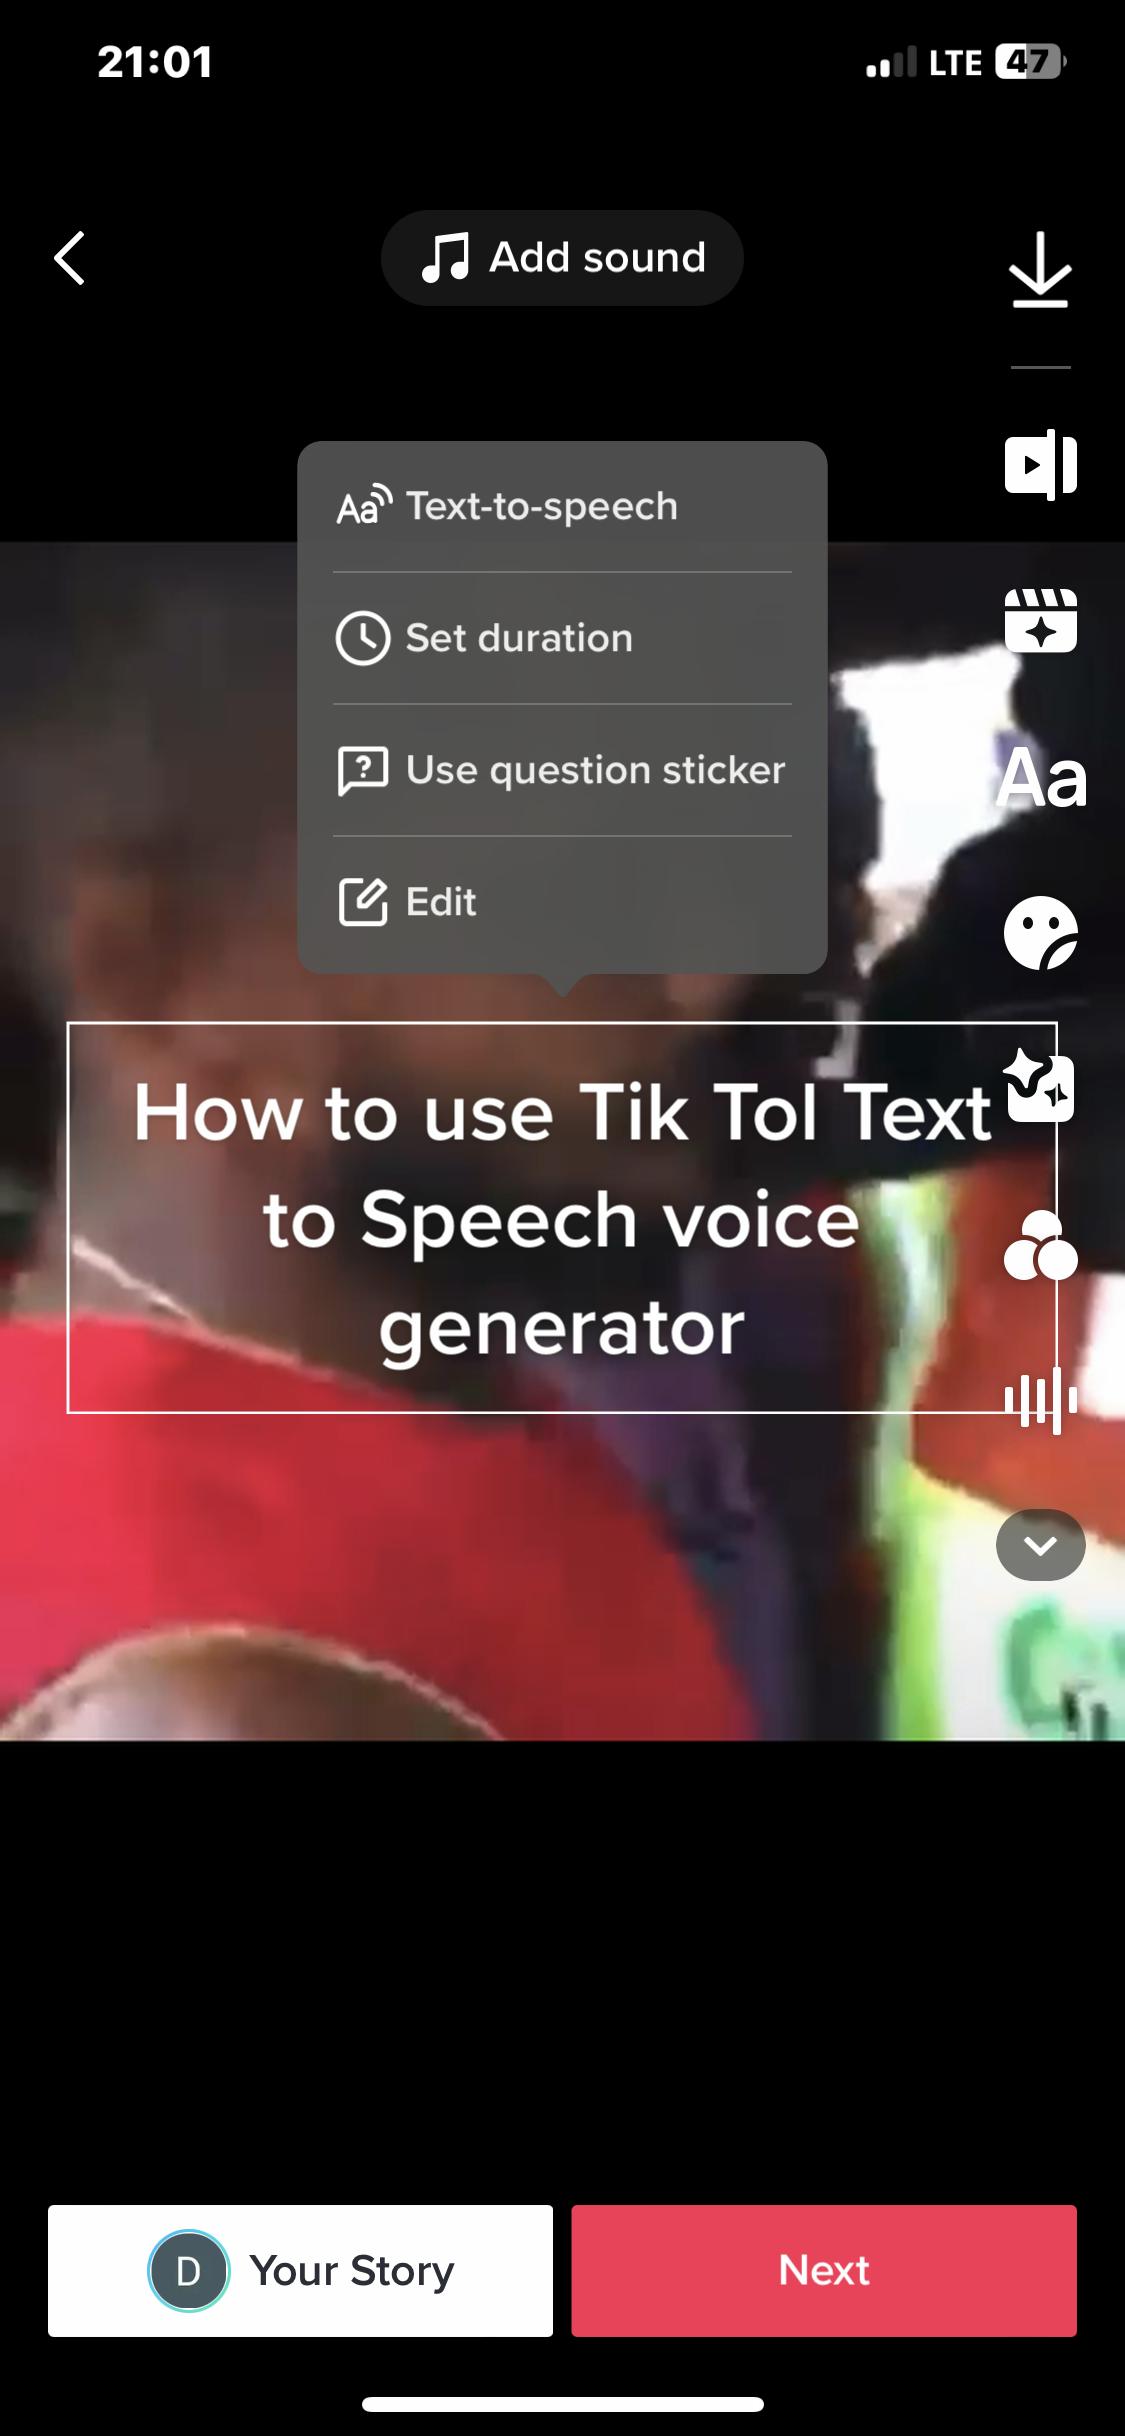 Select Text-to-Speech